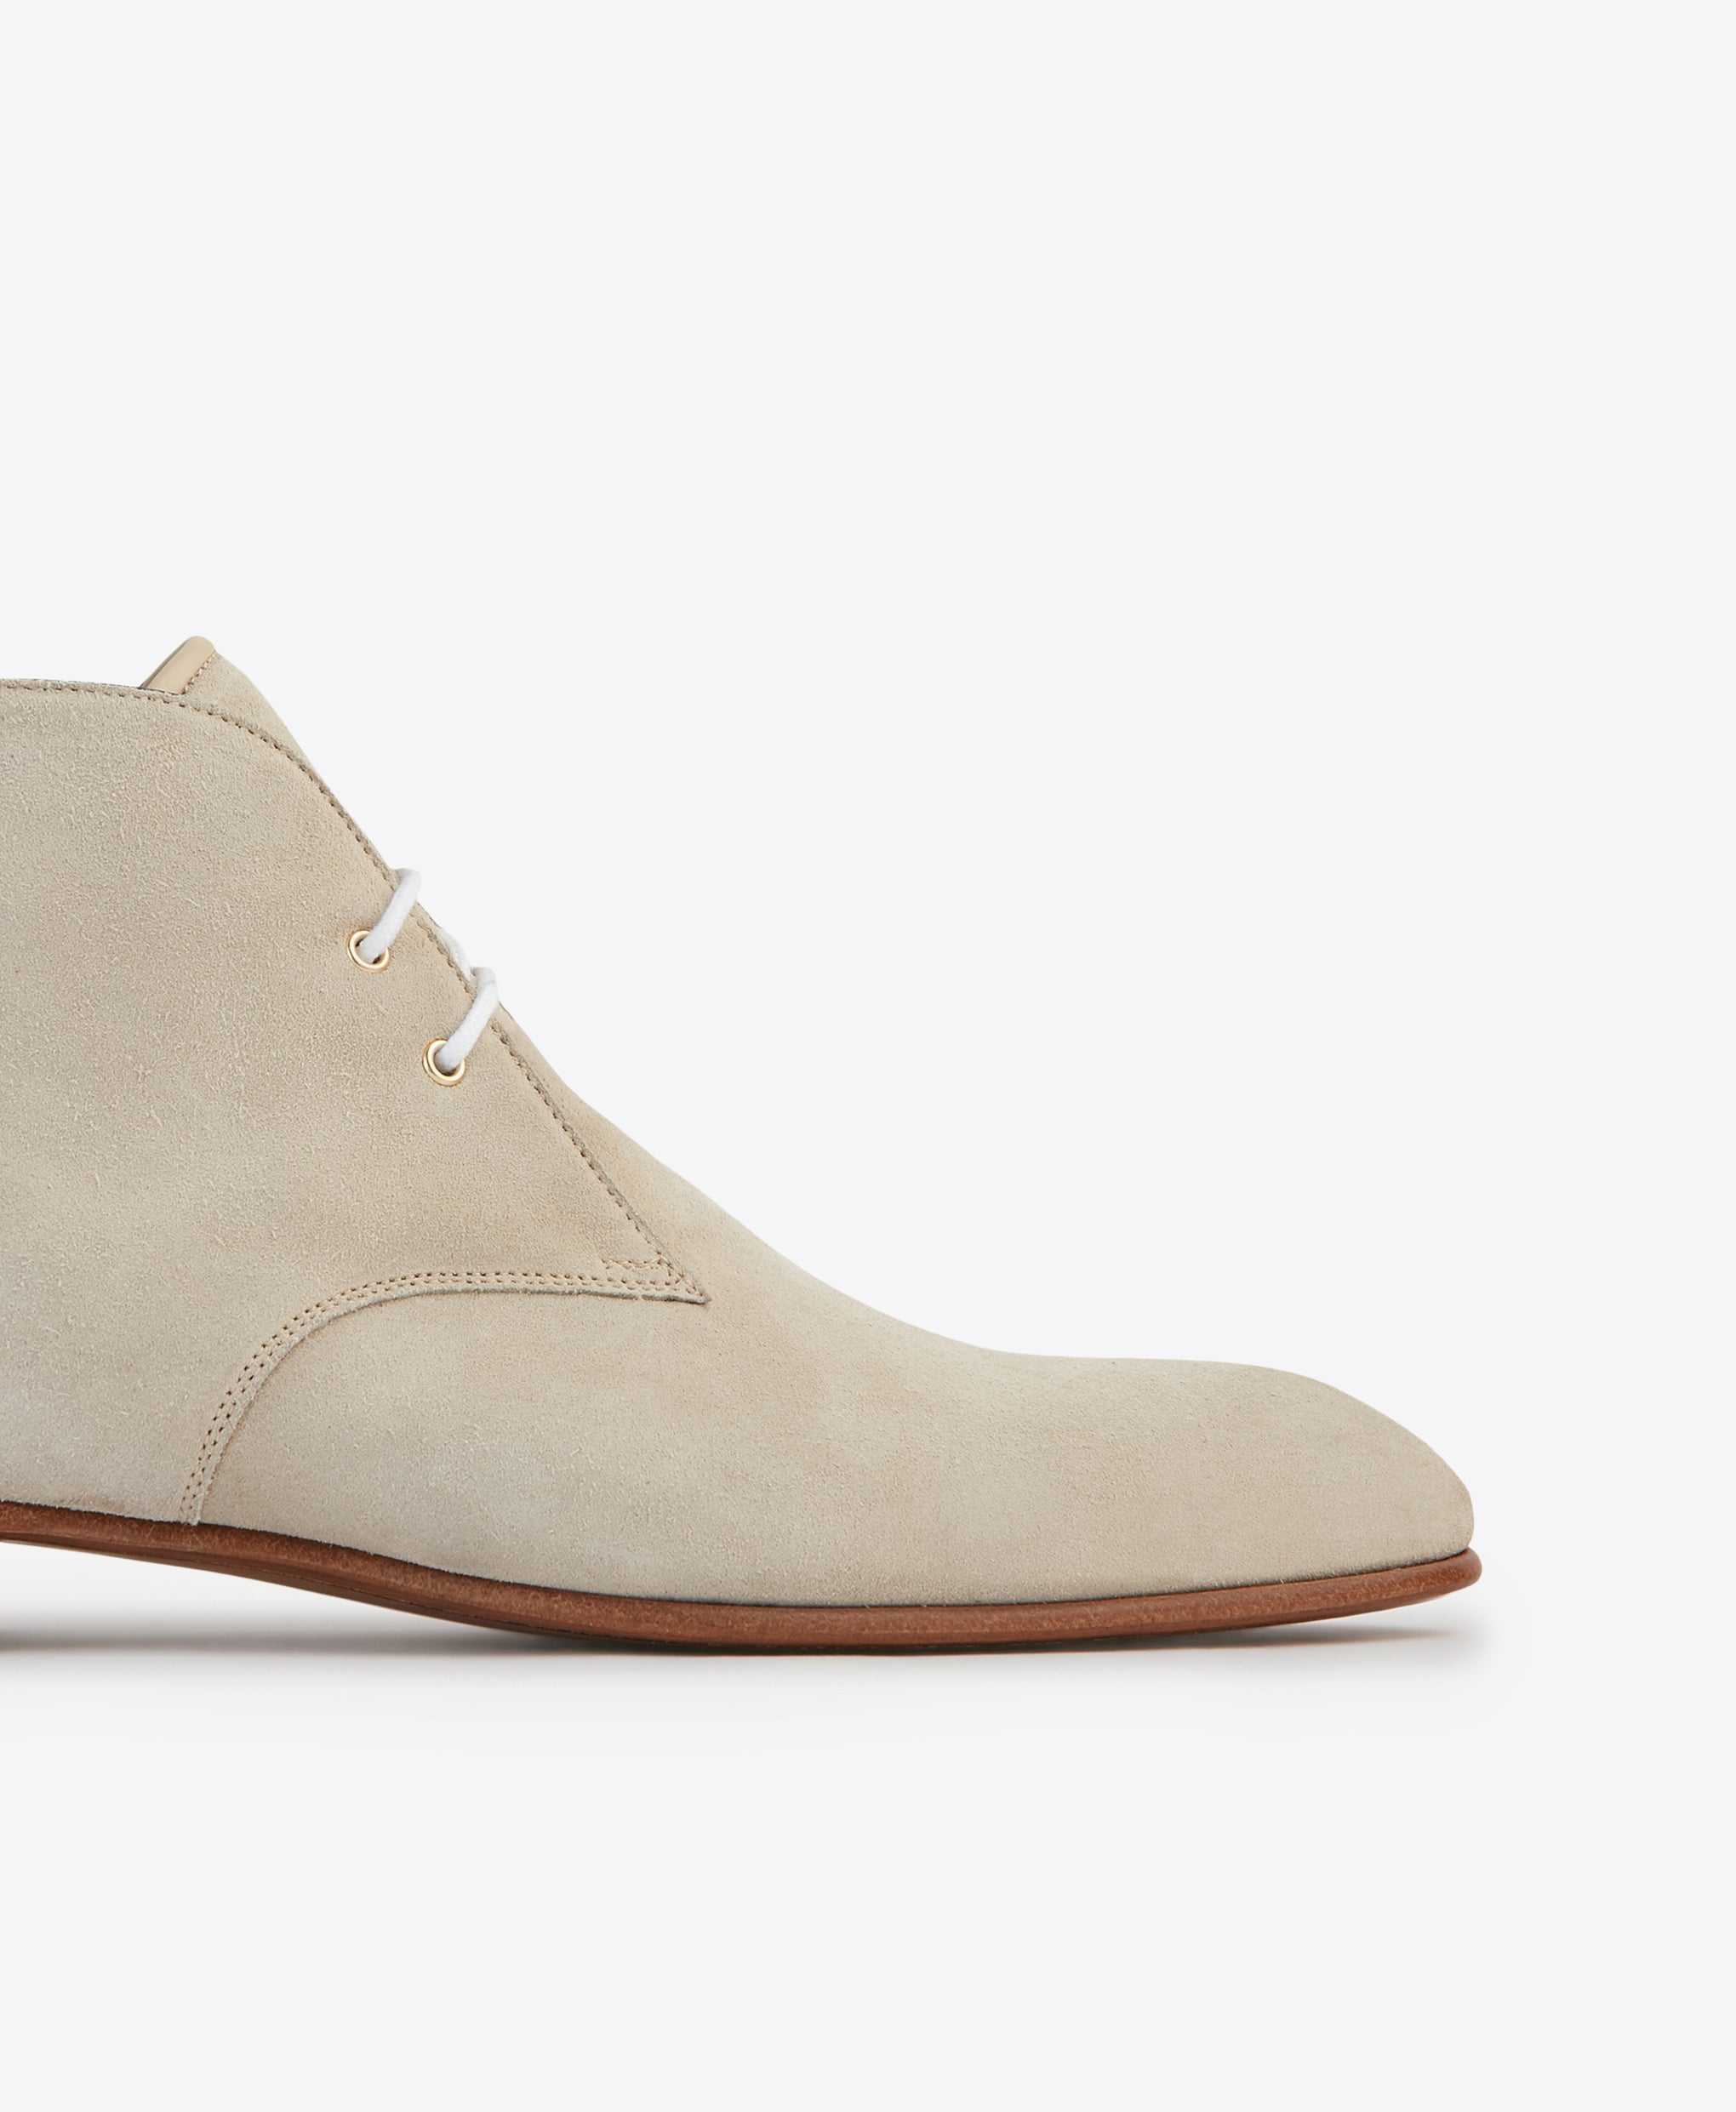 Men's Sand Suede Desert Boots Malone Souliers